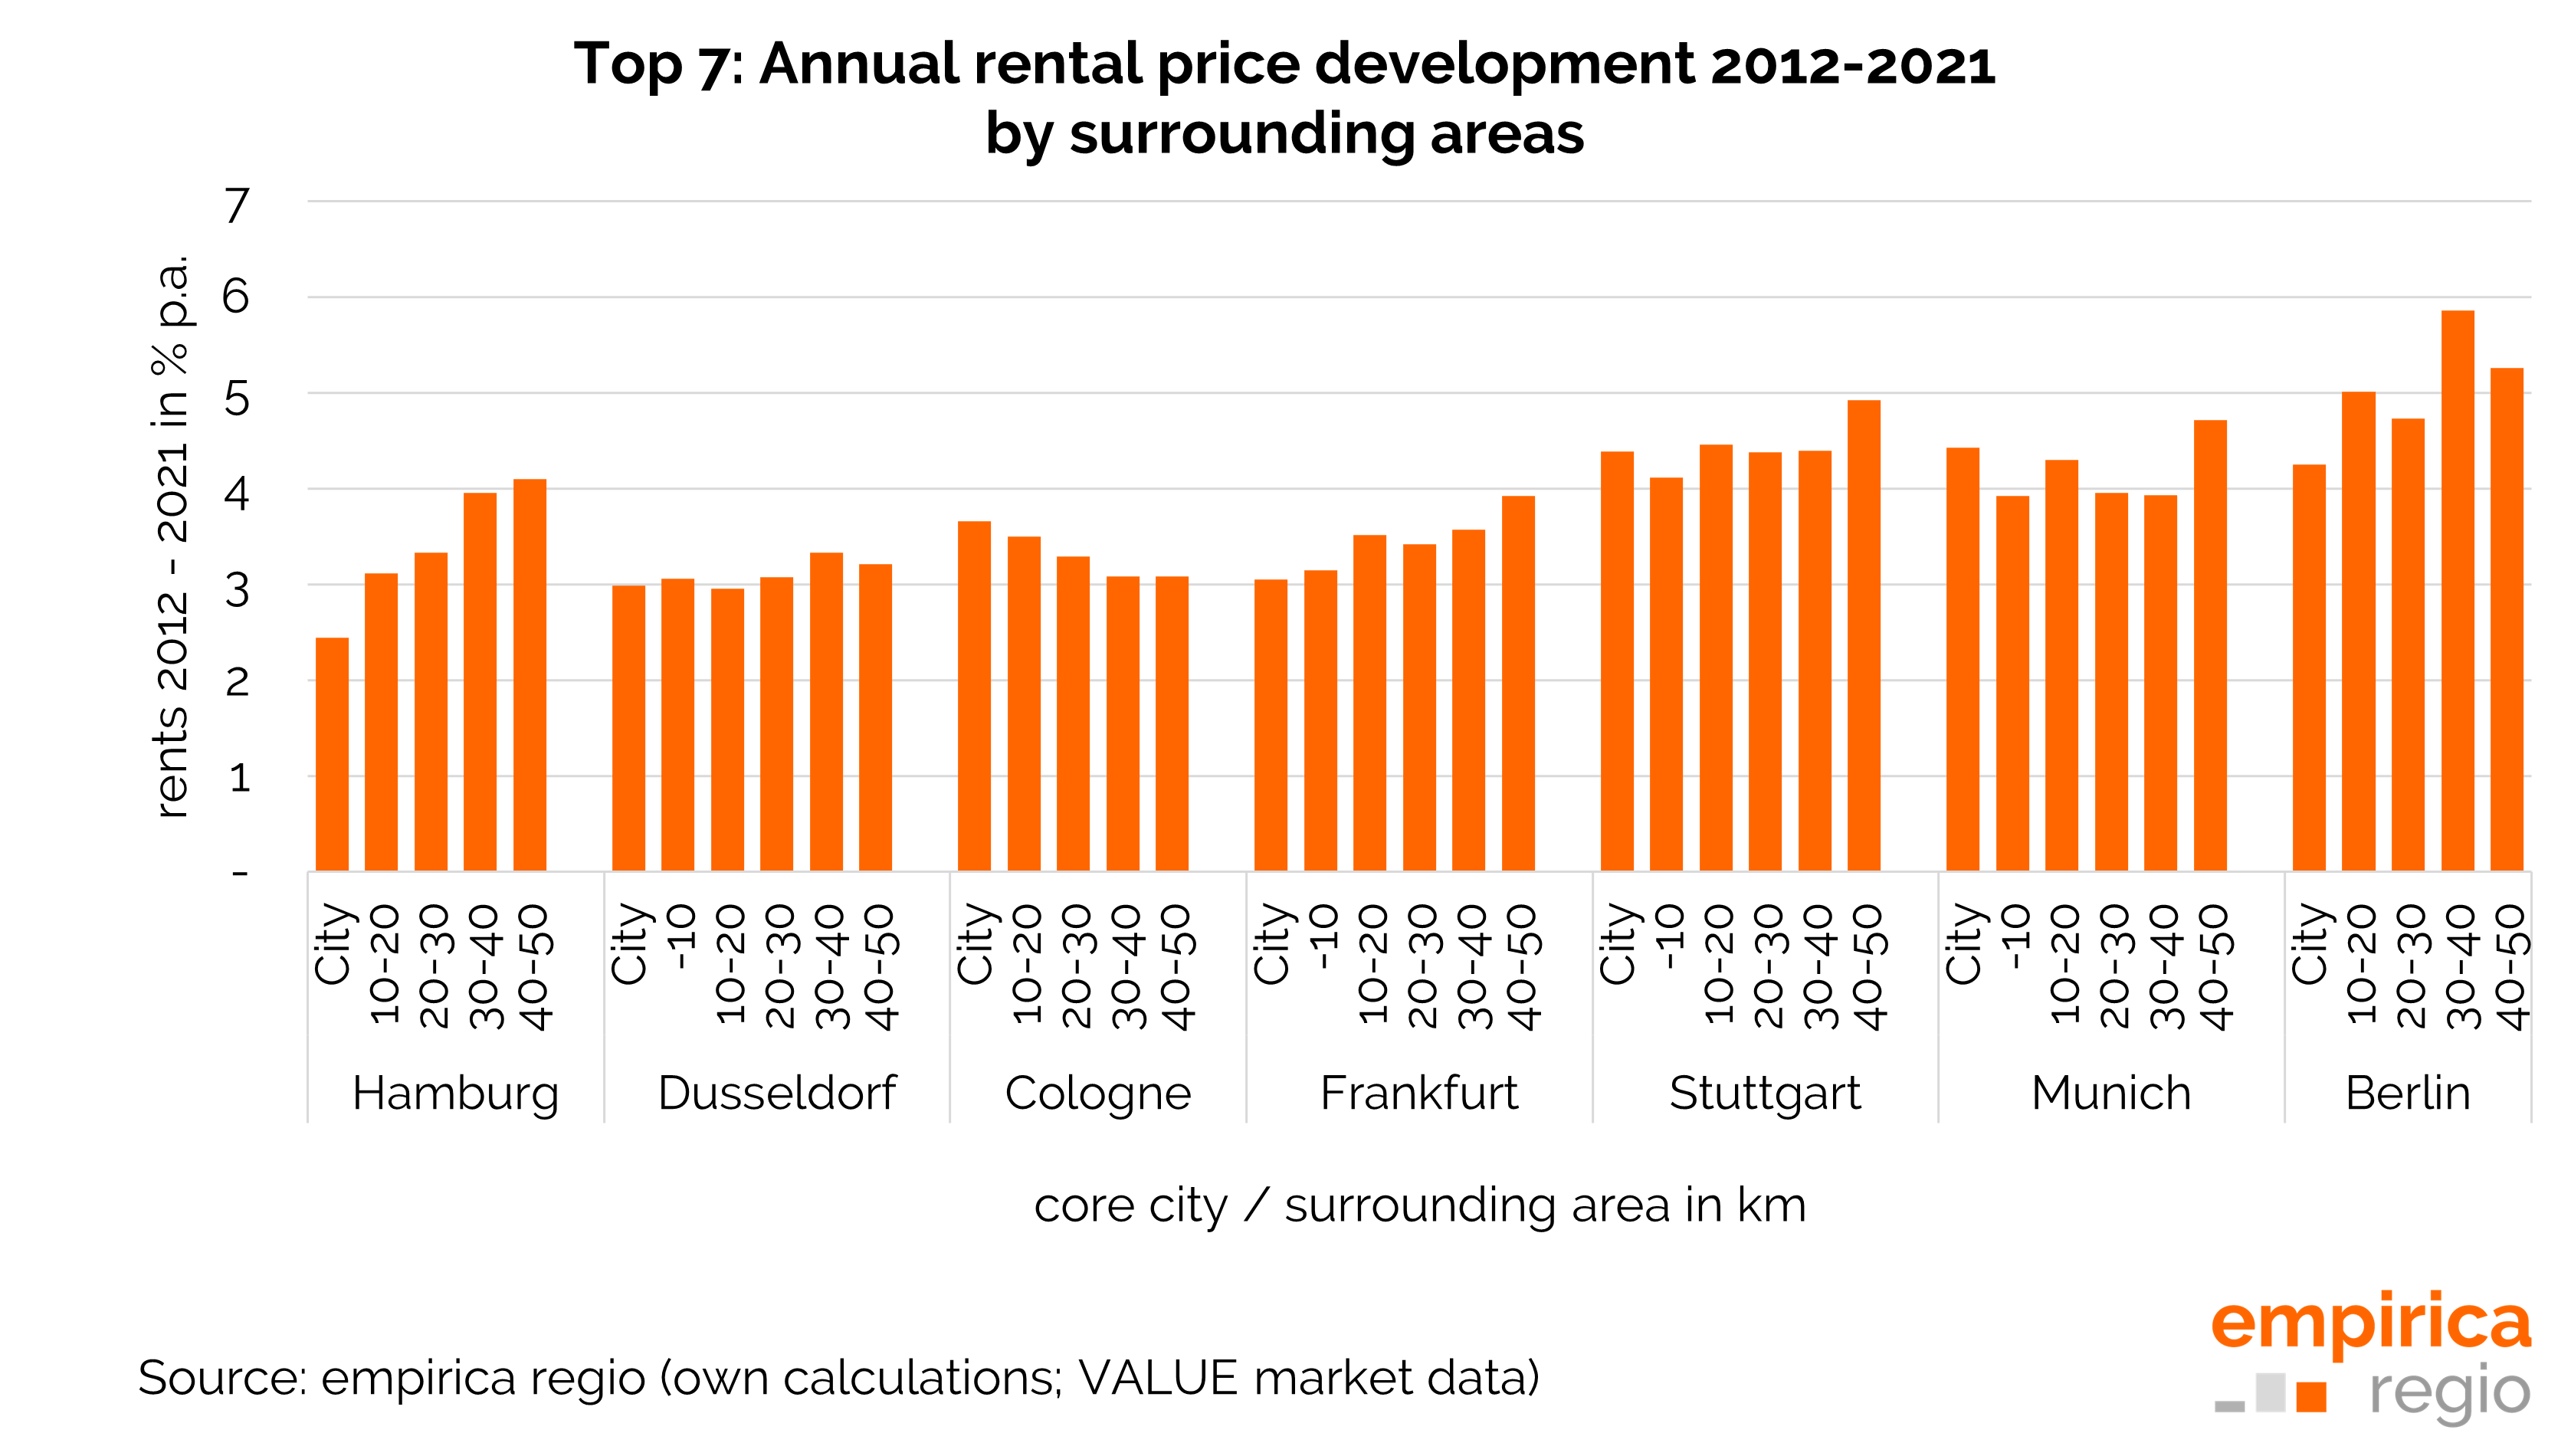 Top 7: Annual rental price development 2012 - 2021 by surrounding areas in comparison